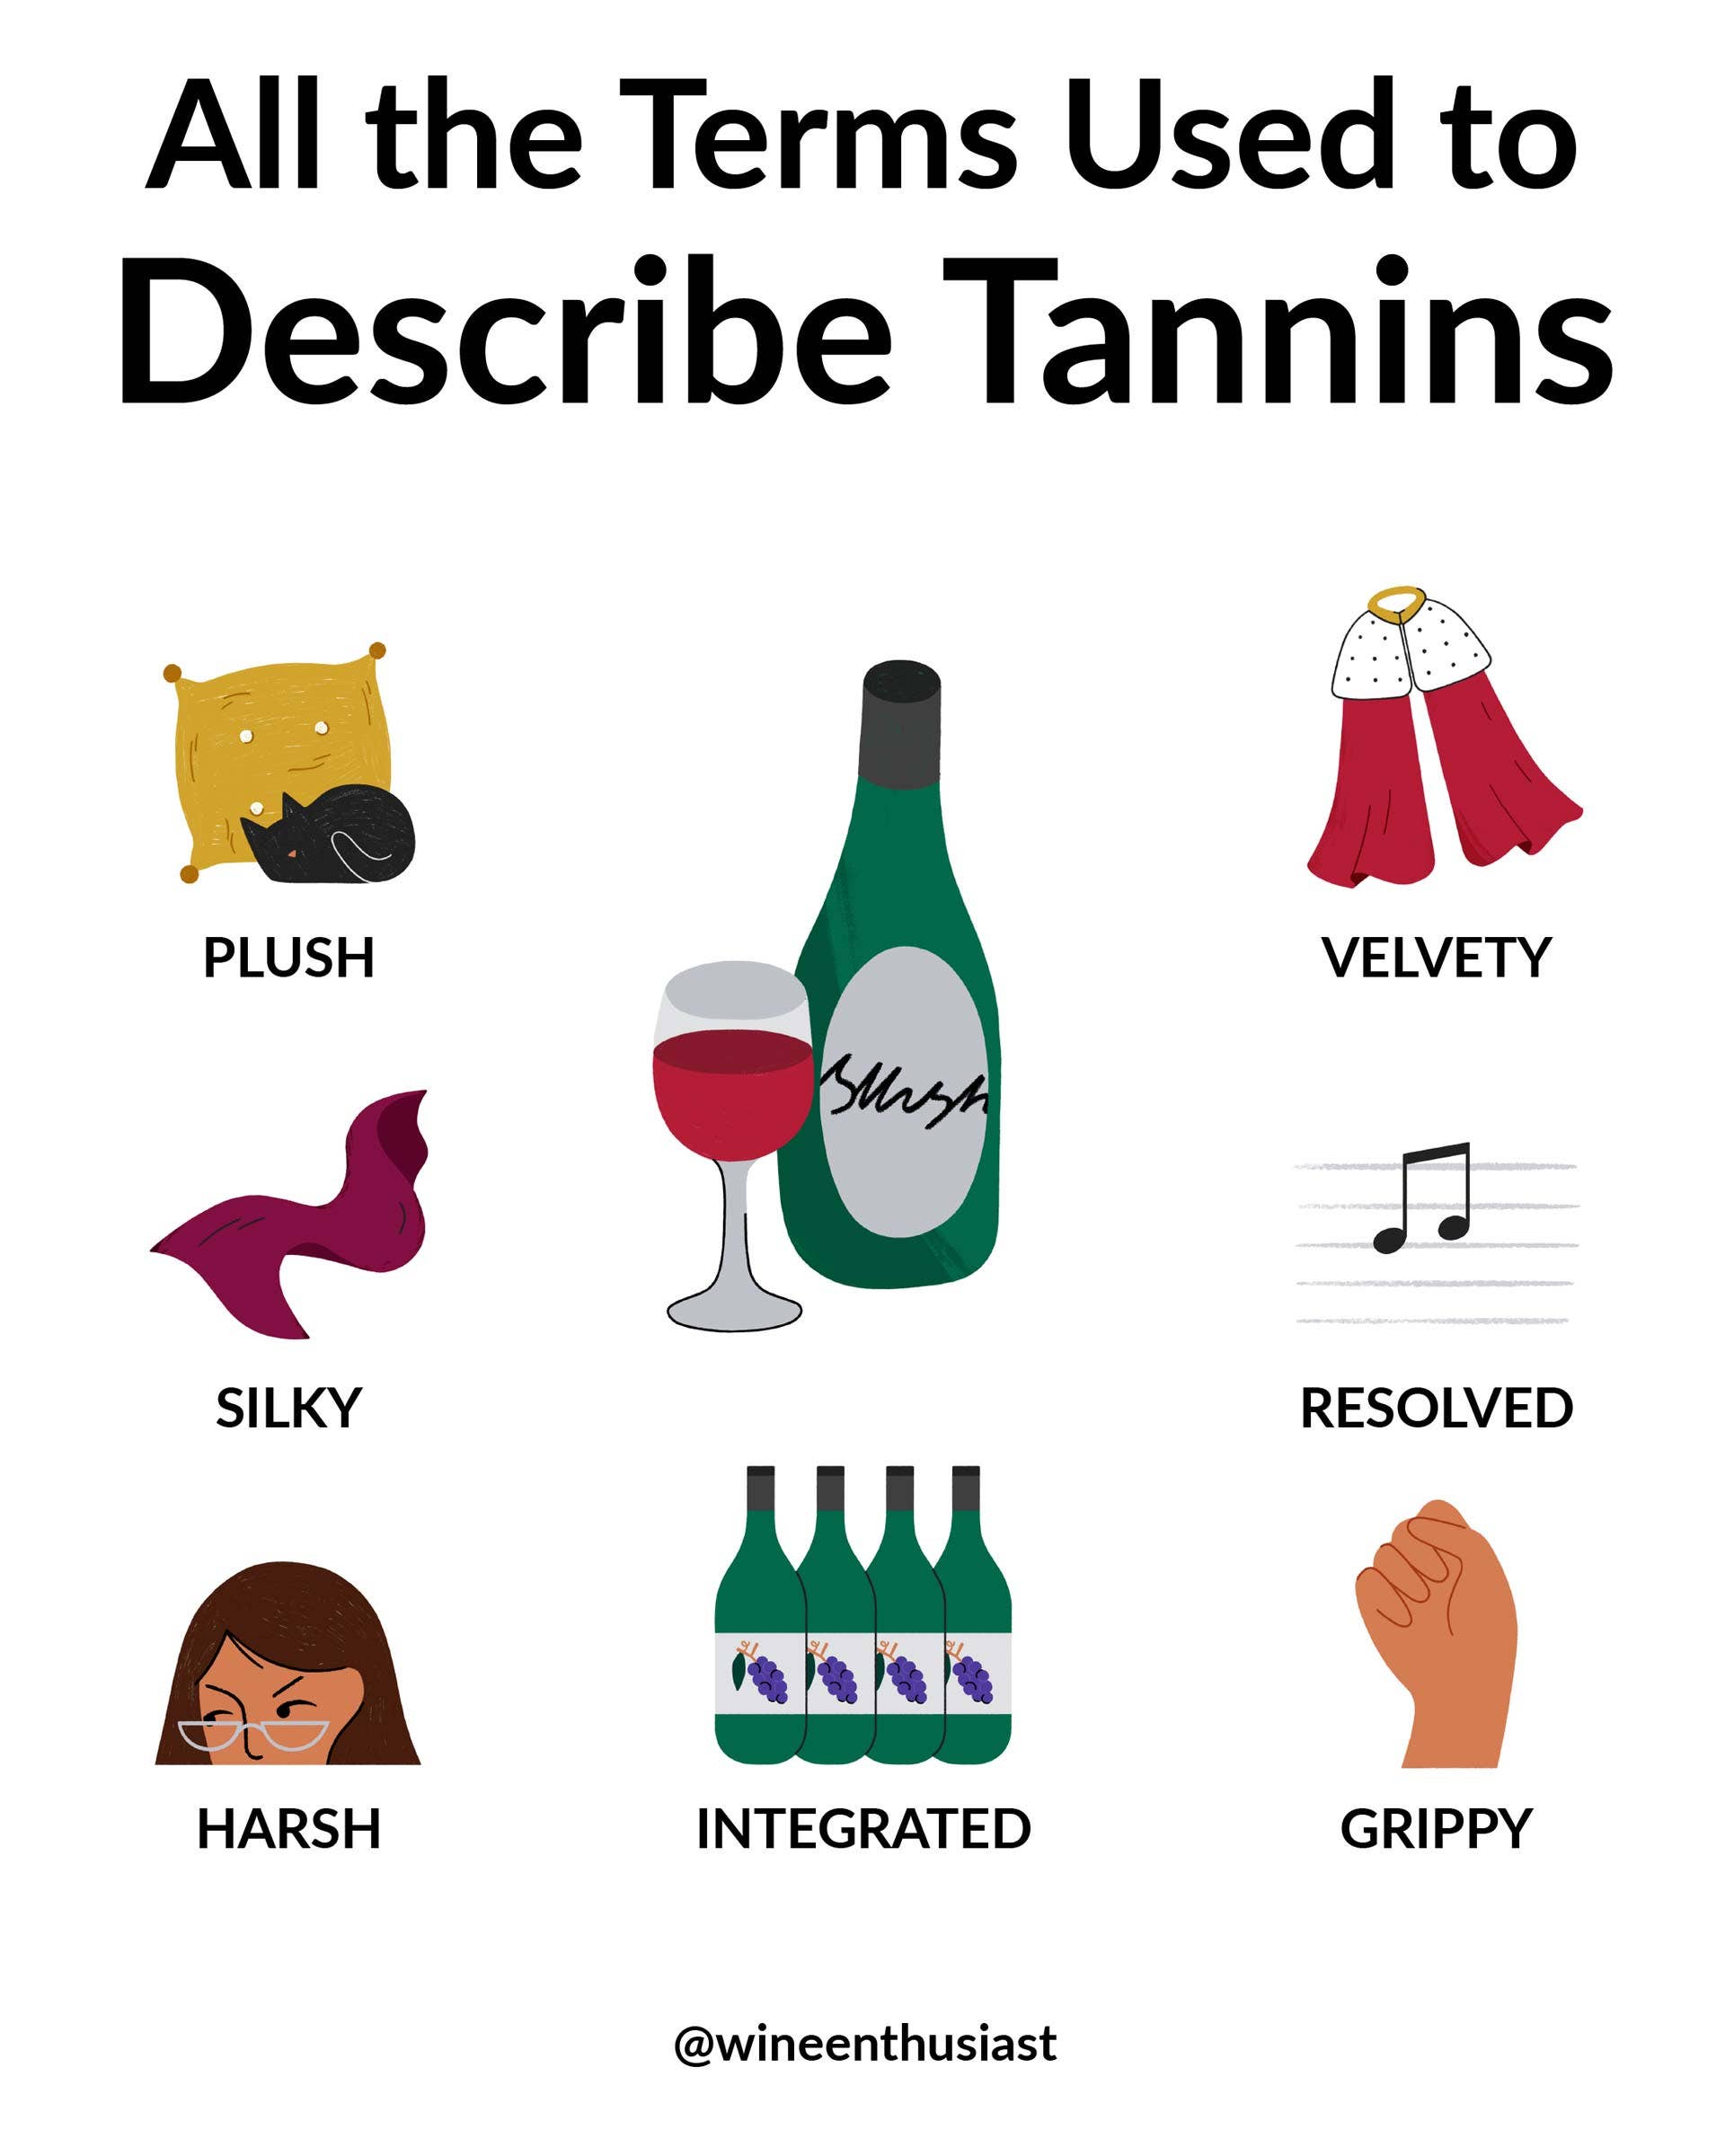 How to describe tannins wine terms